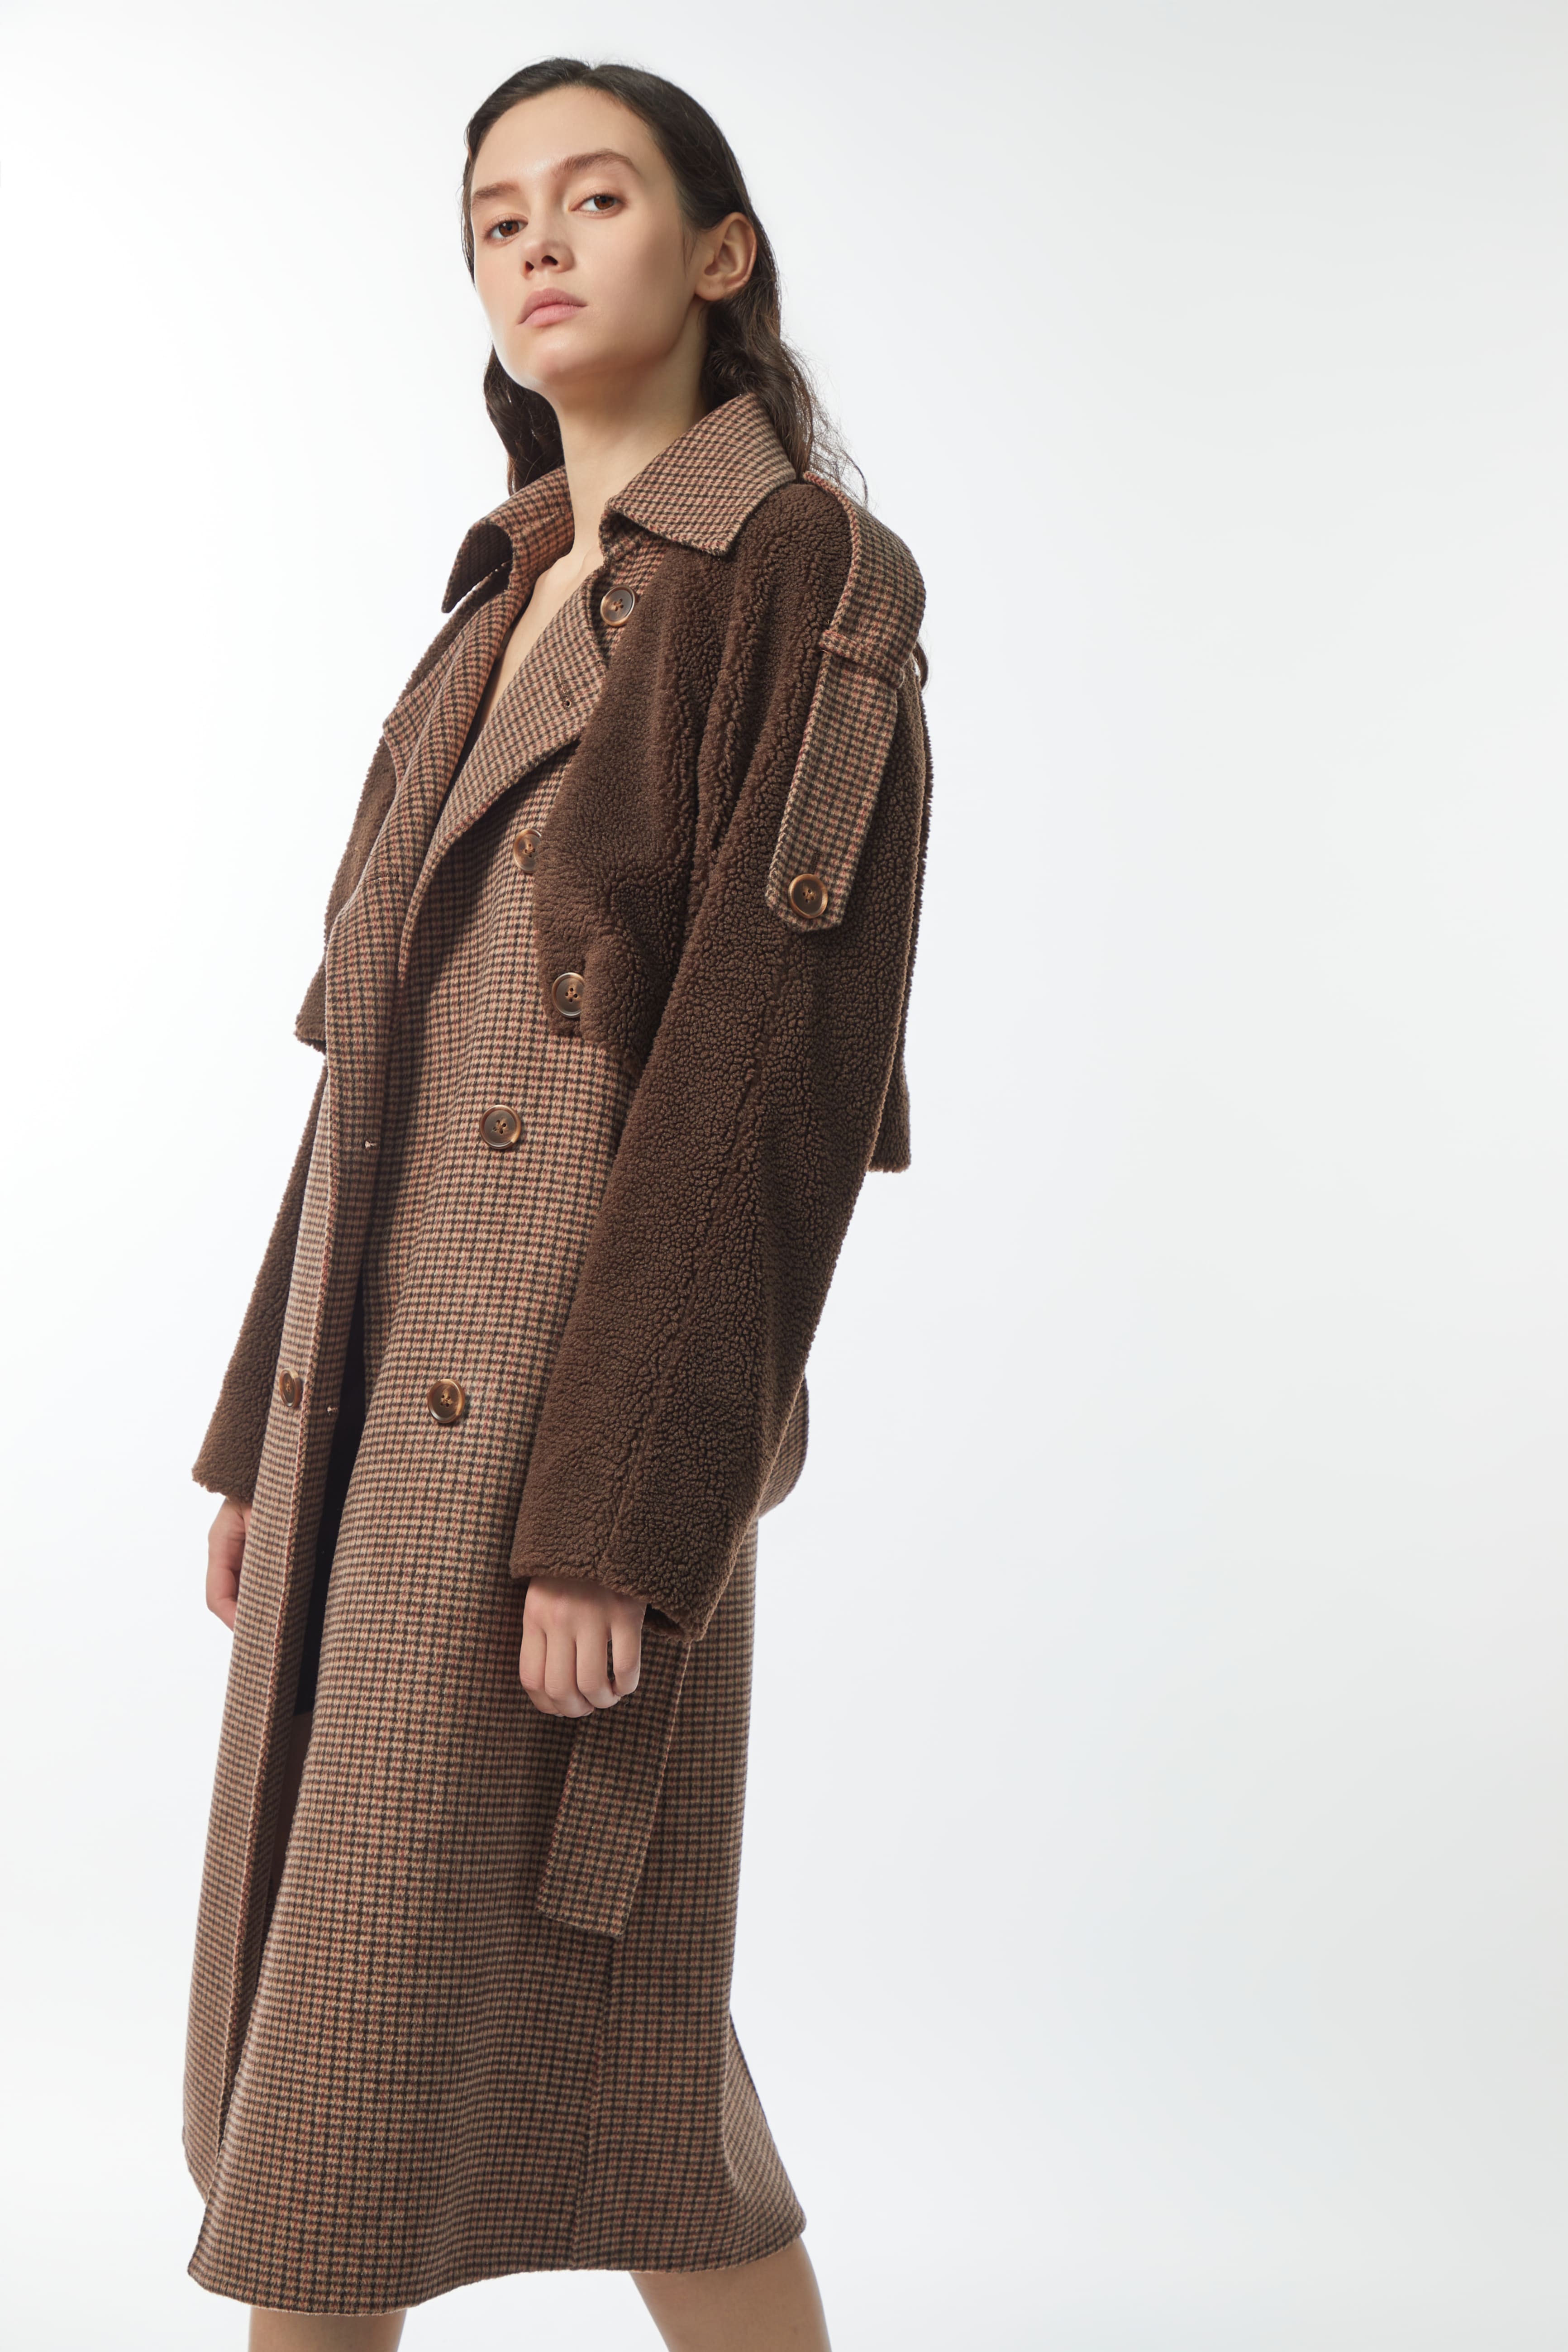 Seaton - Khaki patchwork double-breasted coat - By Quaint